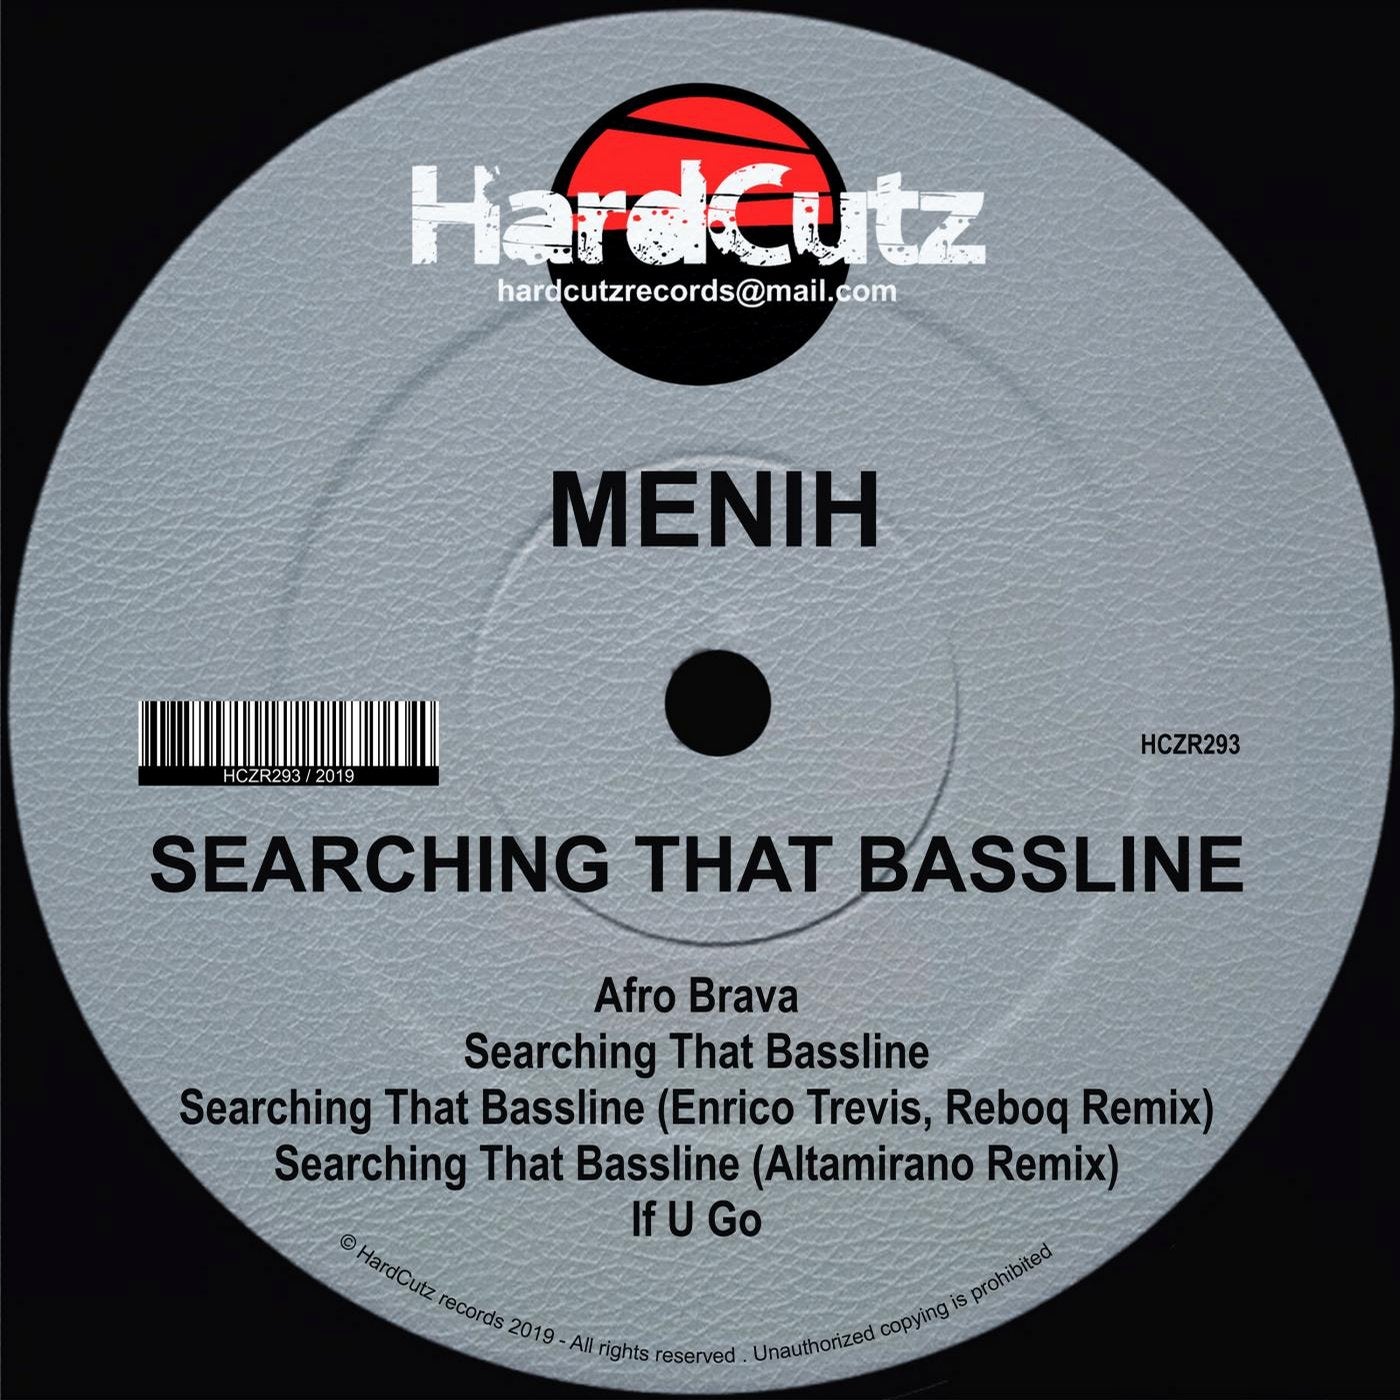 Searching That Bassline!